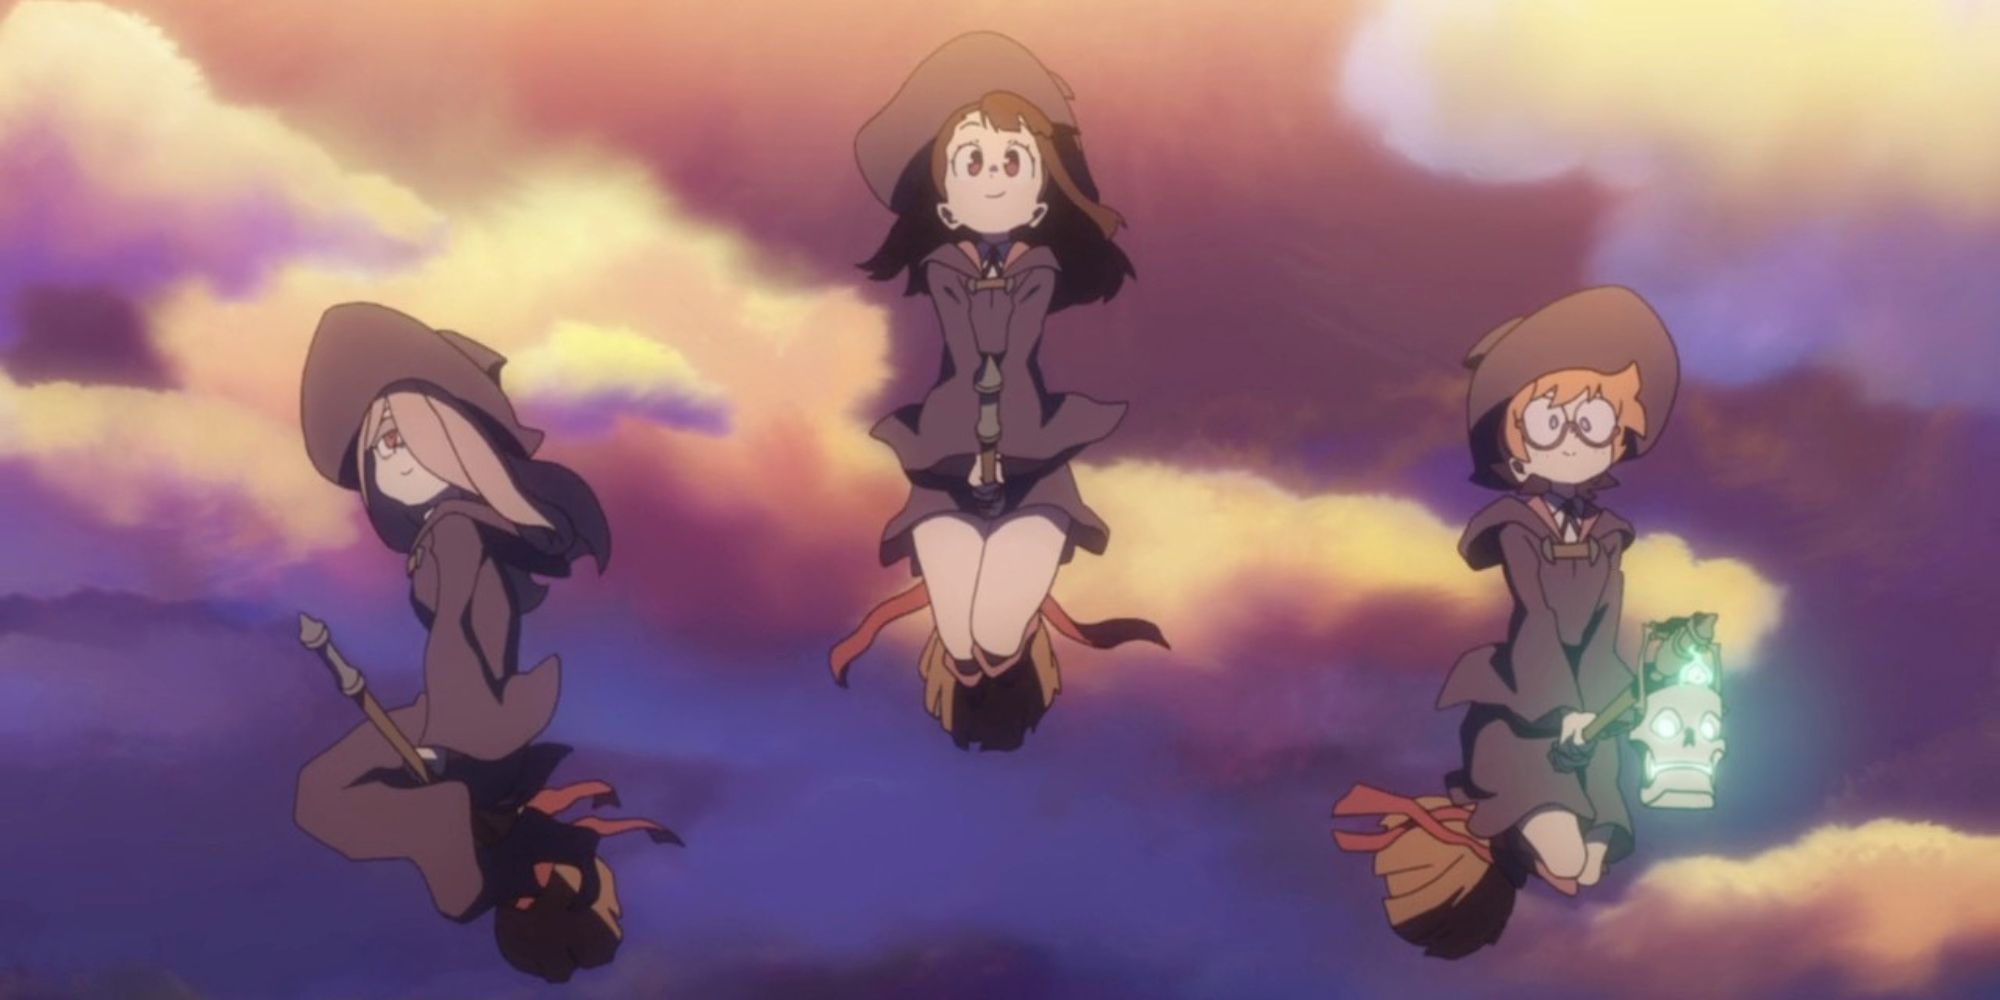 Sucy, Atsuko, and Lotte Little Witch Academia